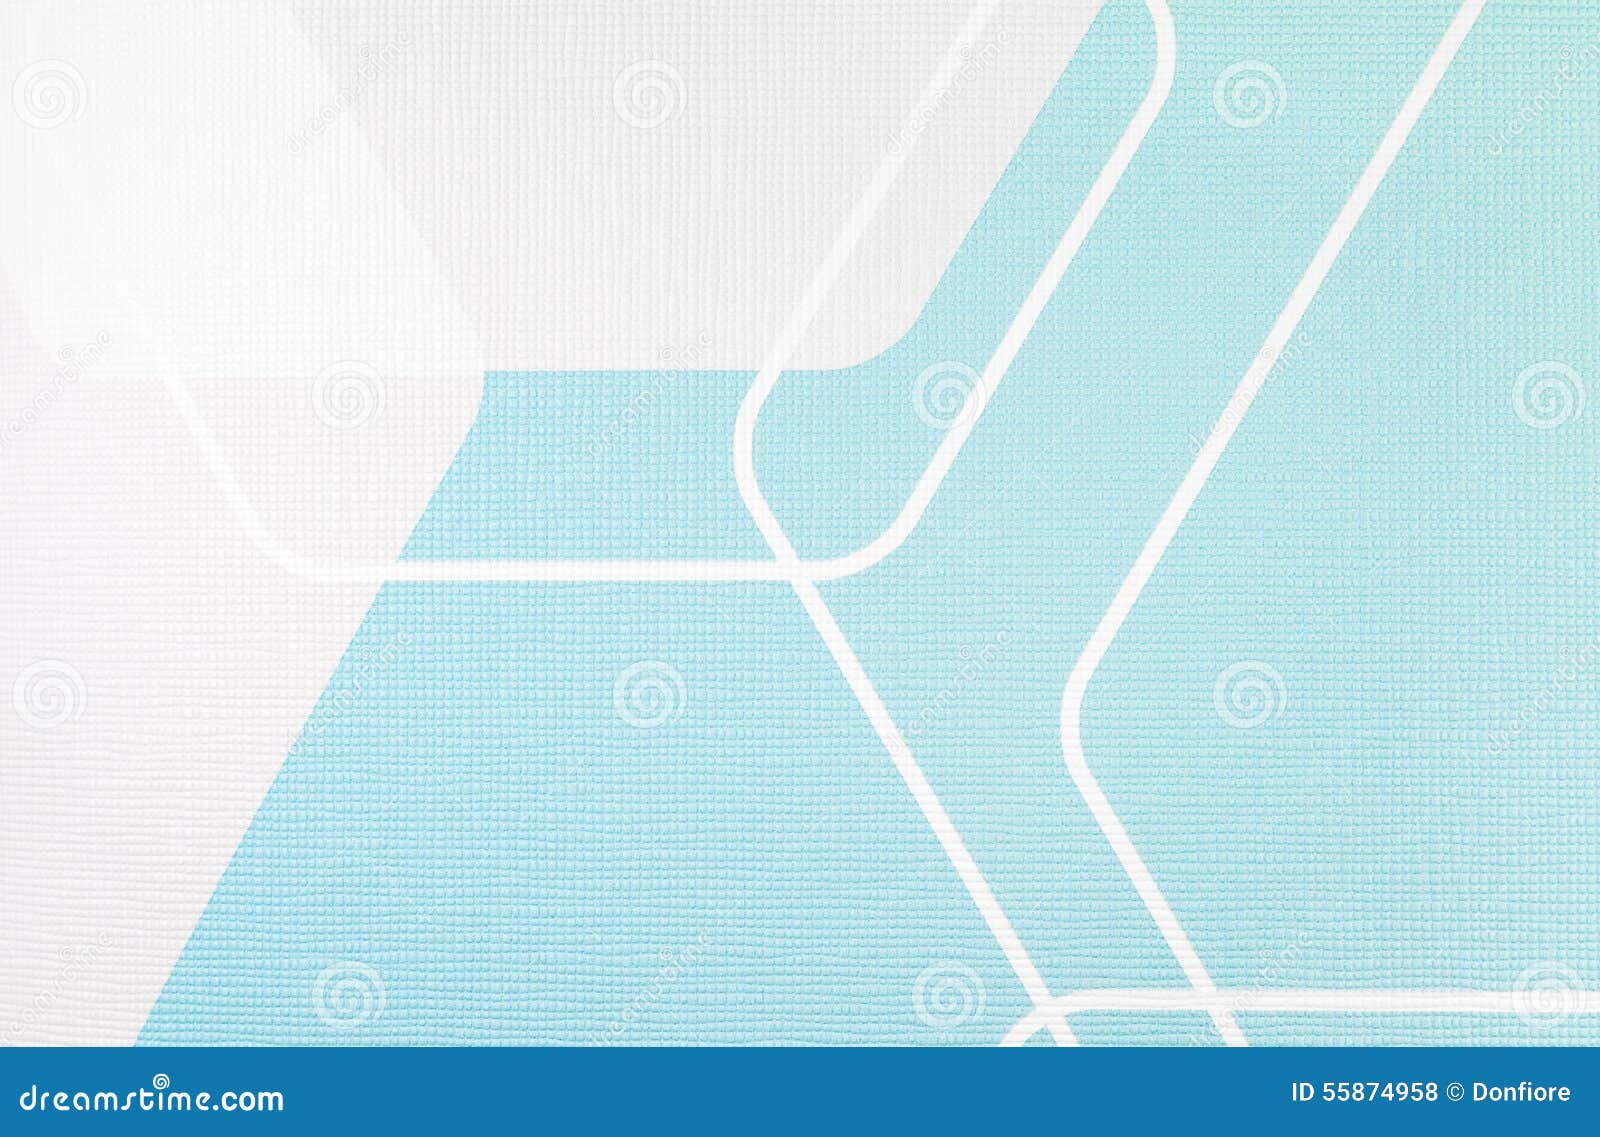 regular geometric fabric texture light blue and white background, cloth pattern